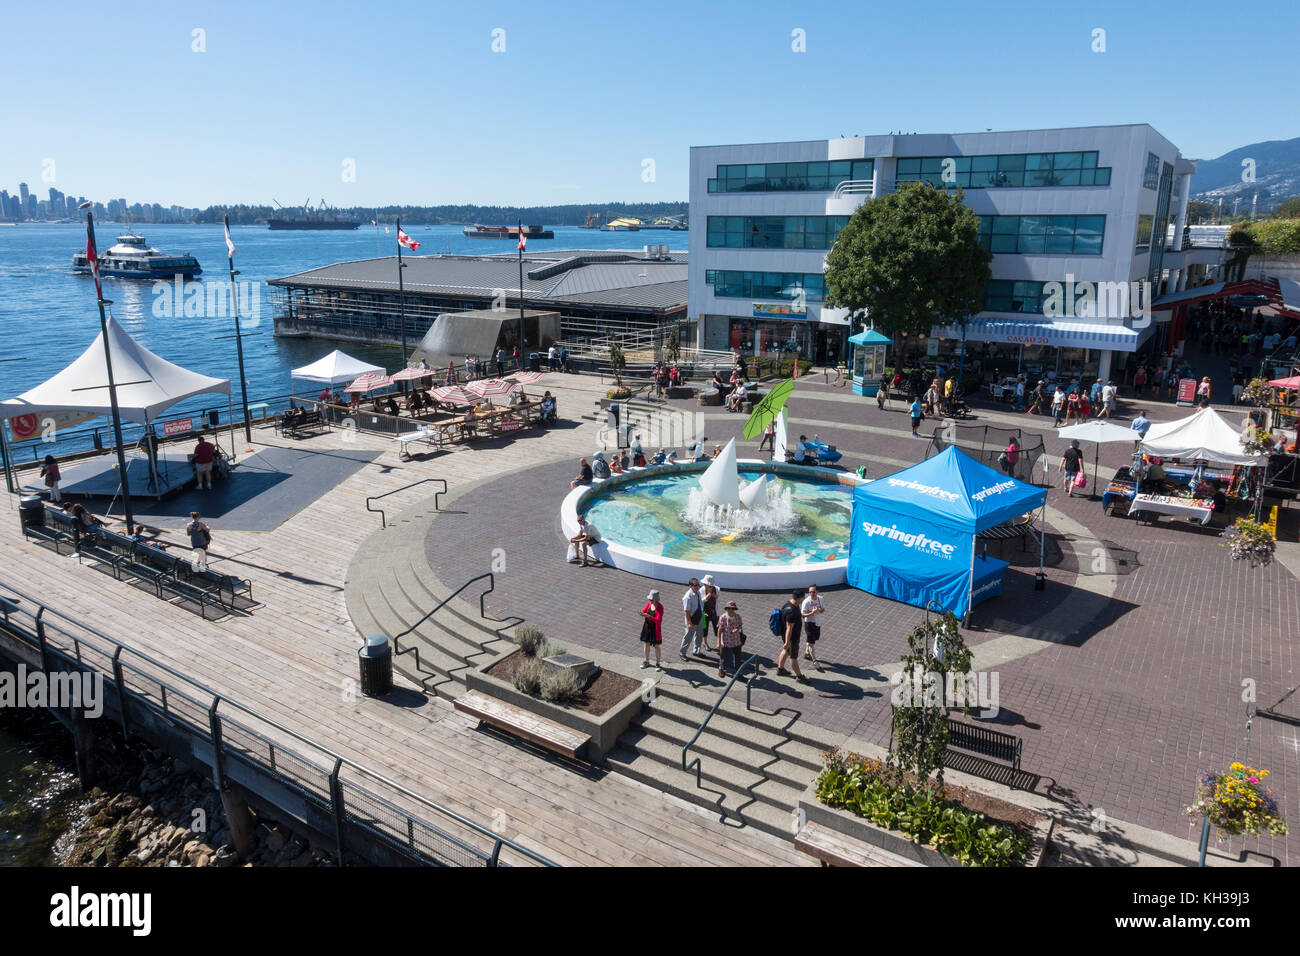 Vancouver British Columbia - Outdoor terrace at the popular Lonsdale Quay market and shopping center Stock Photo